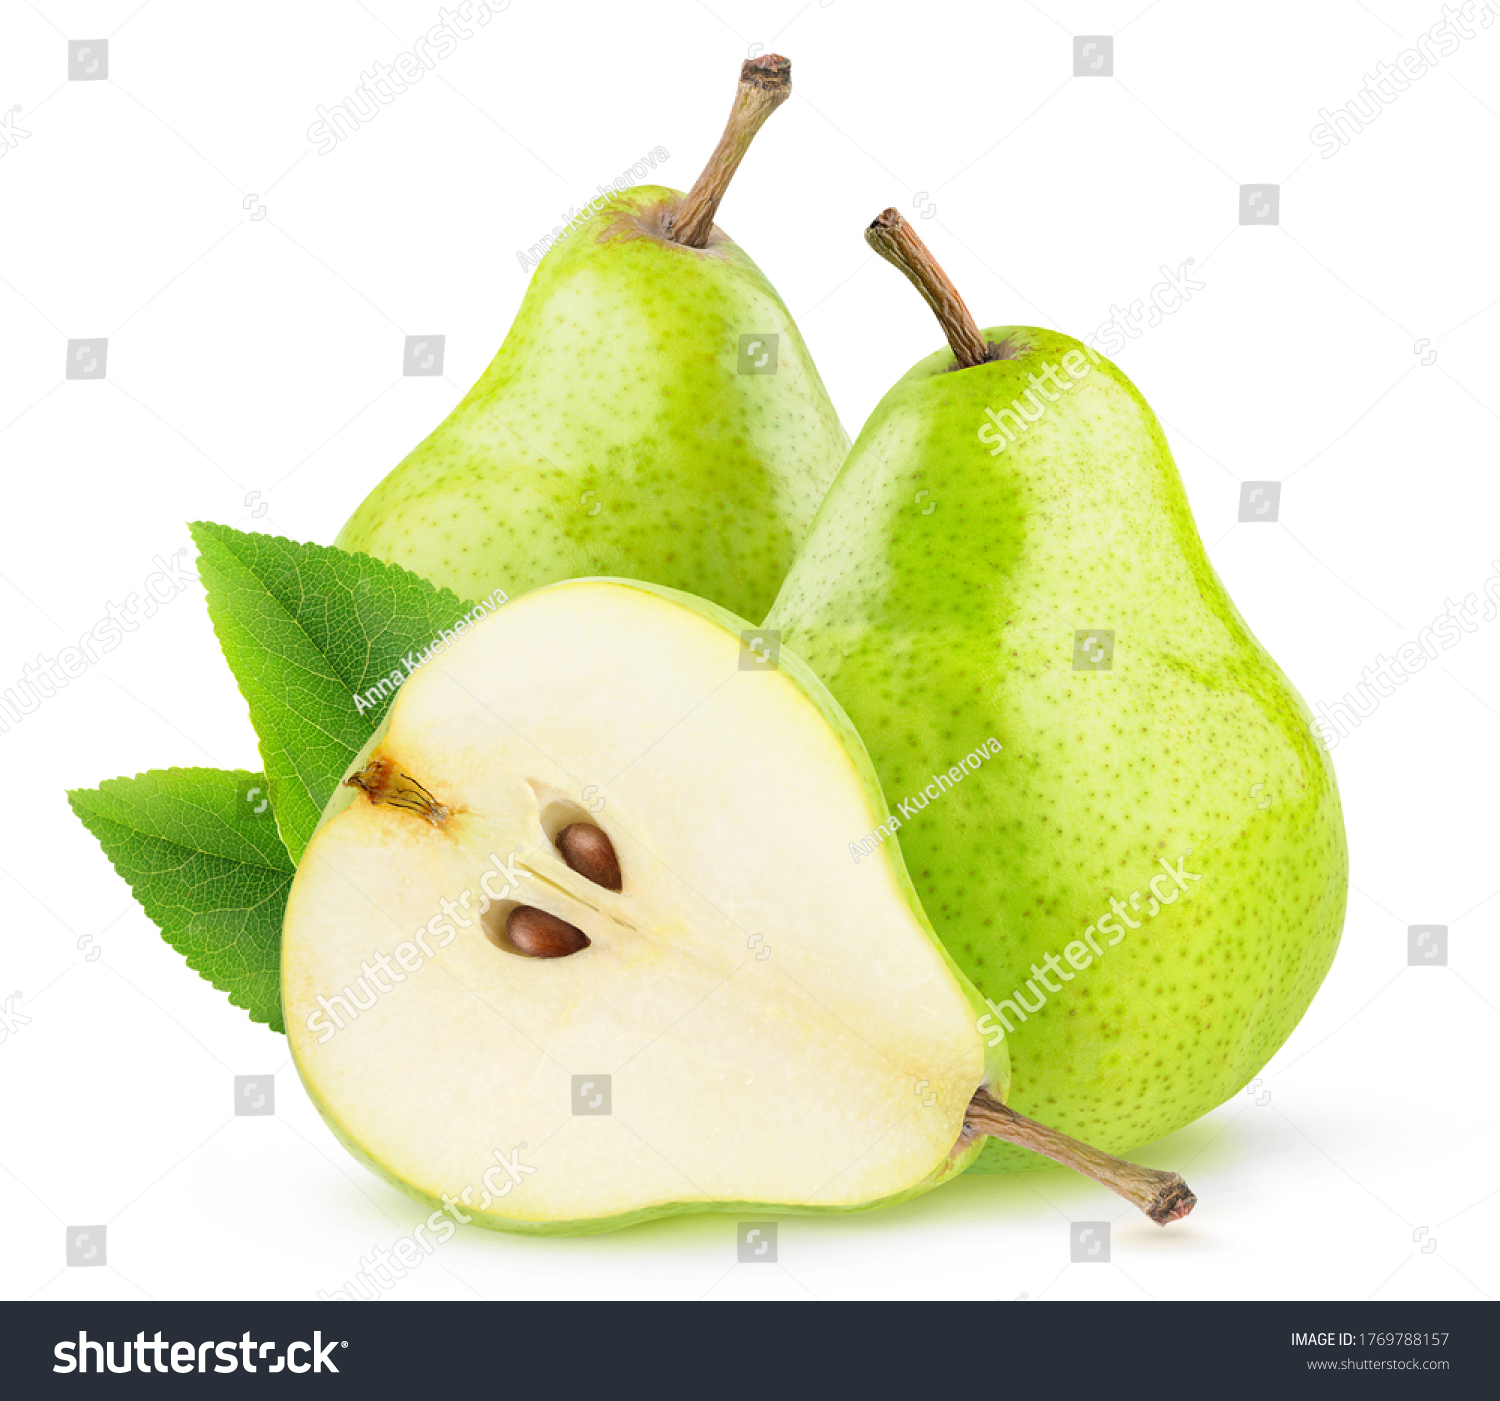 Isolated green pear fruits. Two green pears and a half with seeds isolated on white background #1769788157